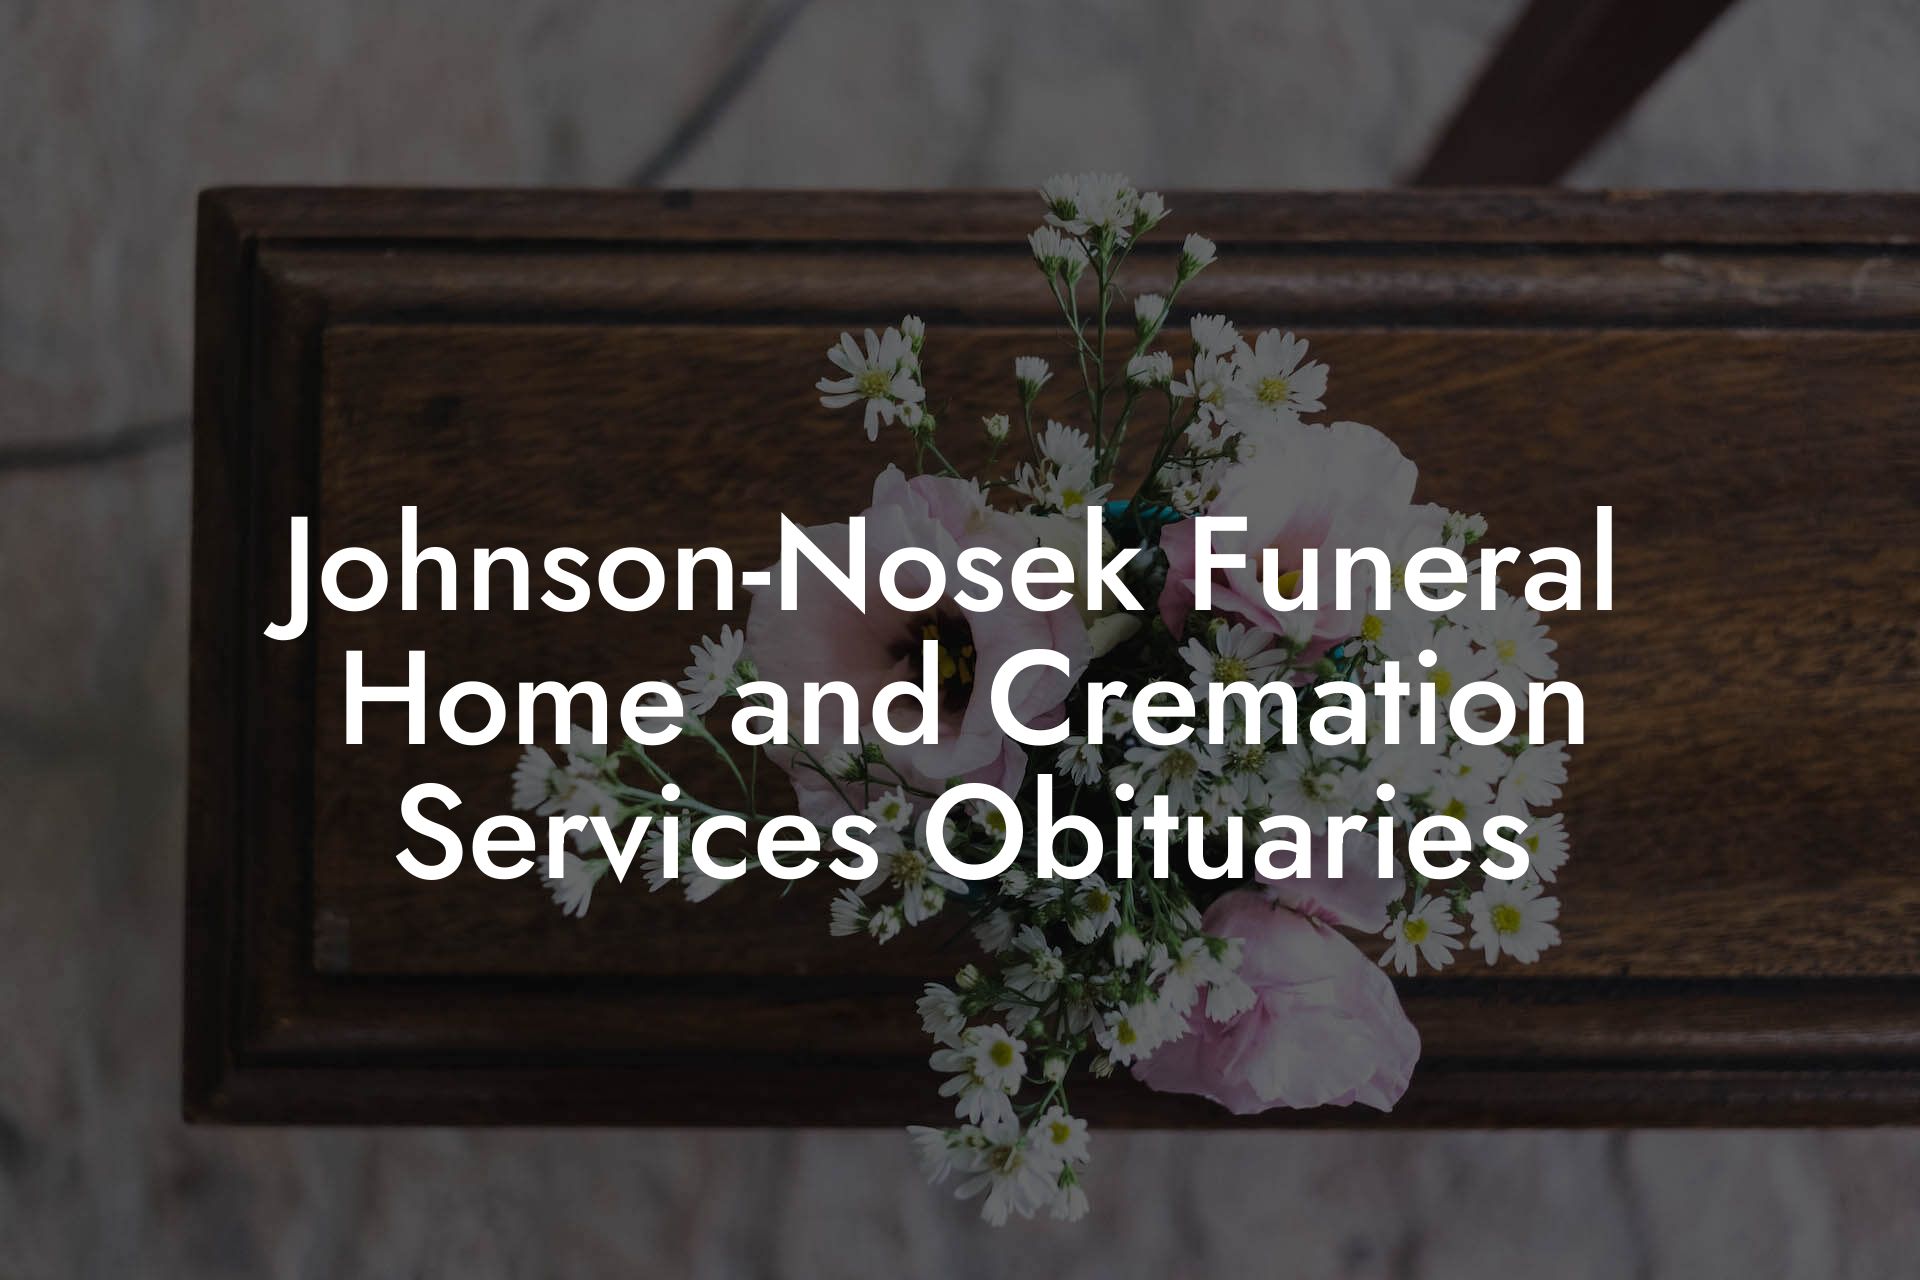 Johnson-Nosek Funeral Home and Cremation Services Obituaries